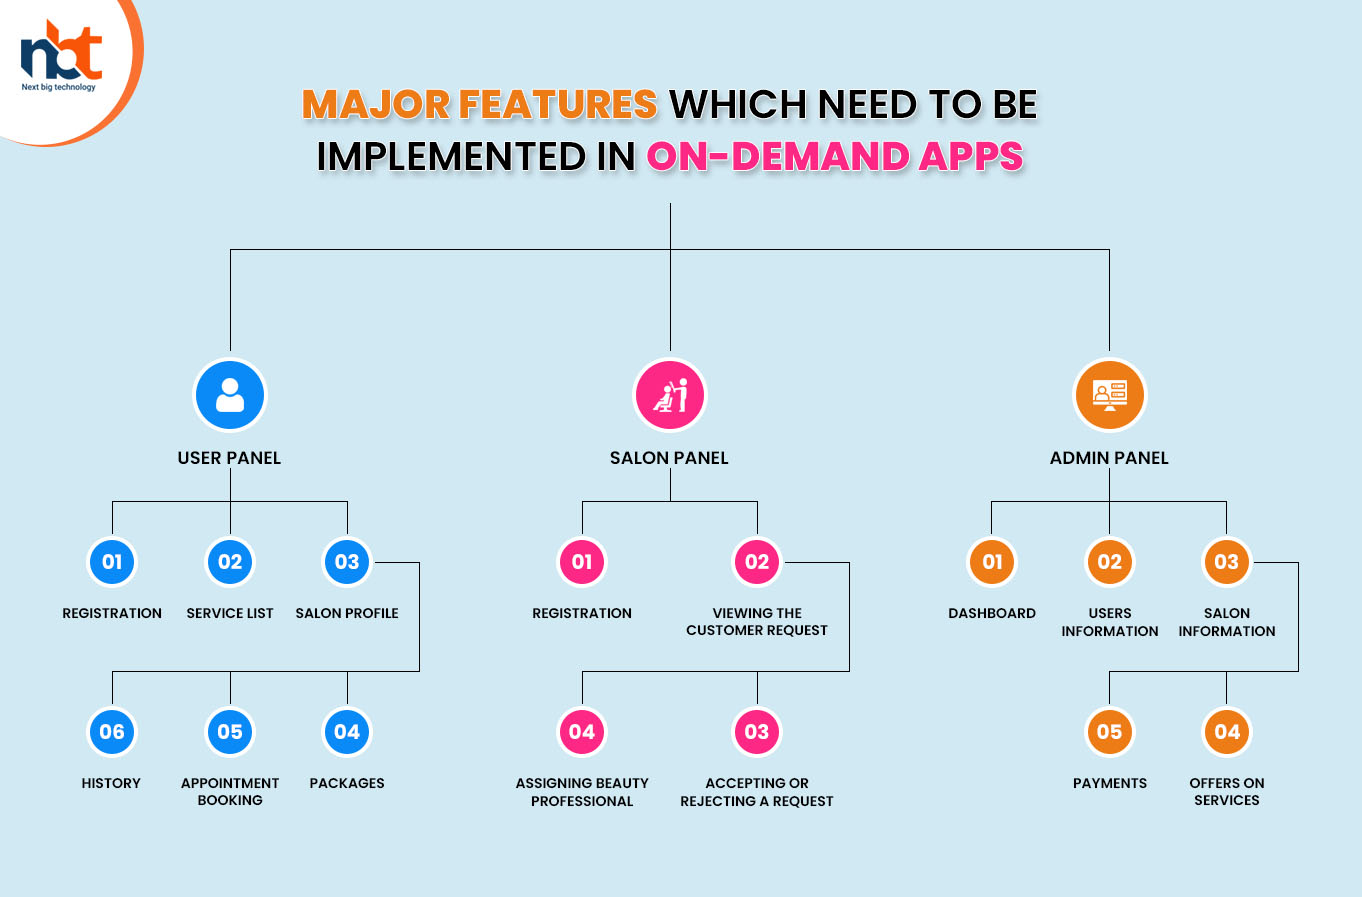 Major Features Which Need to be Implemented in On-Demand Apps